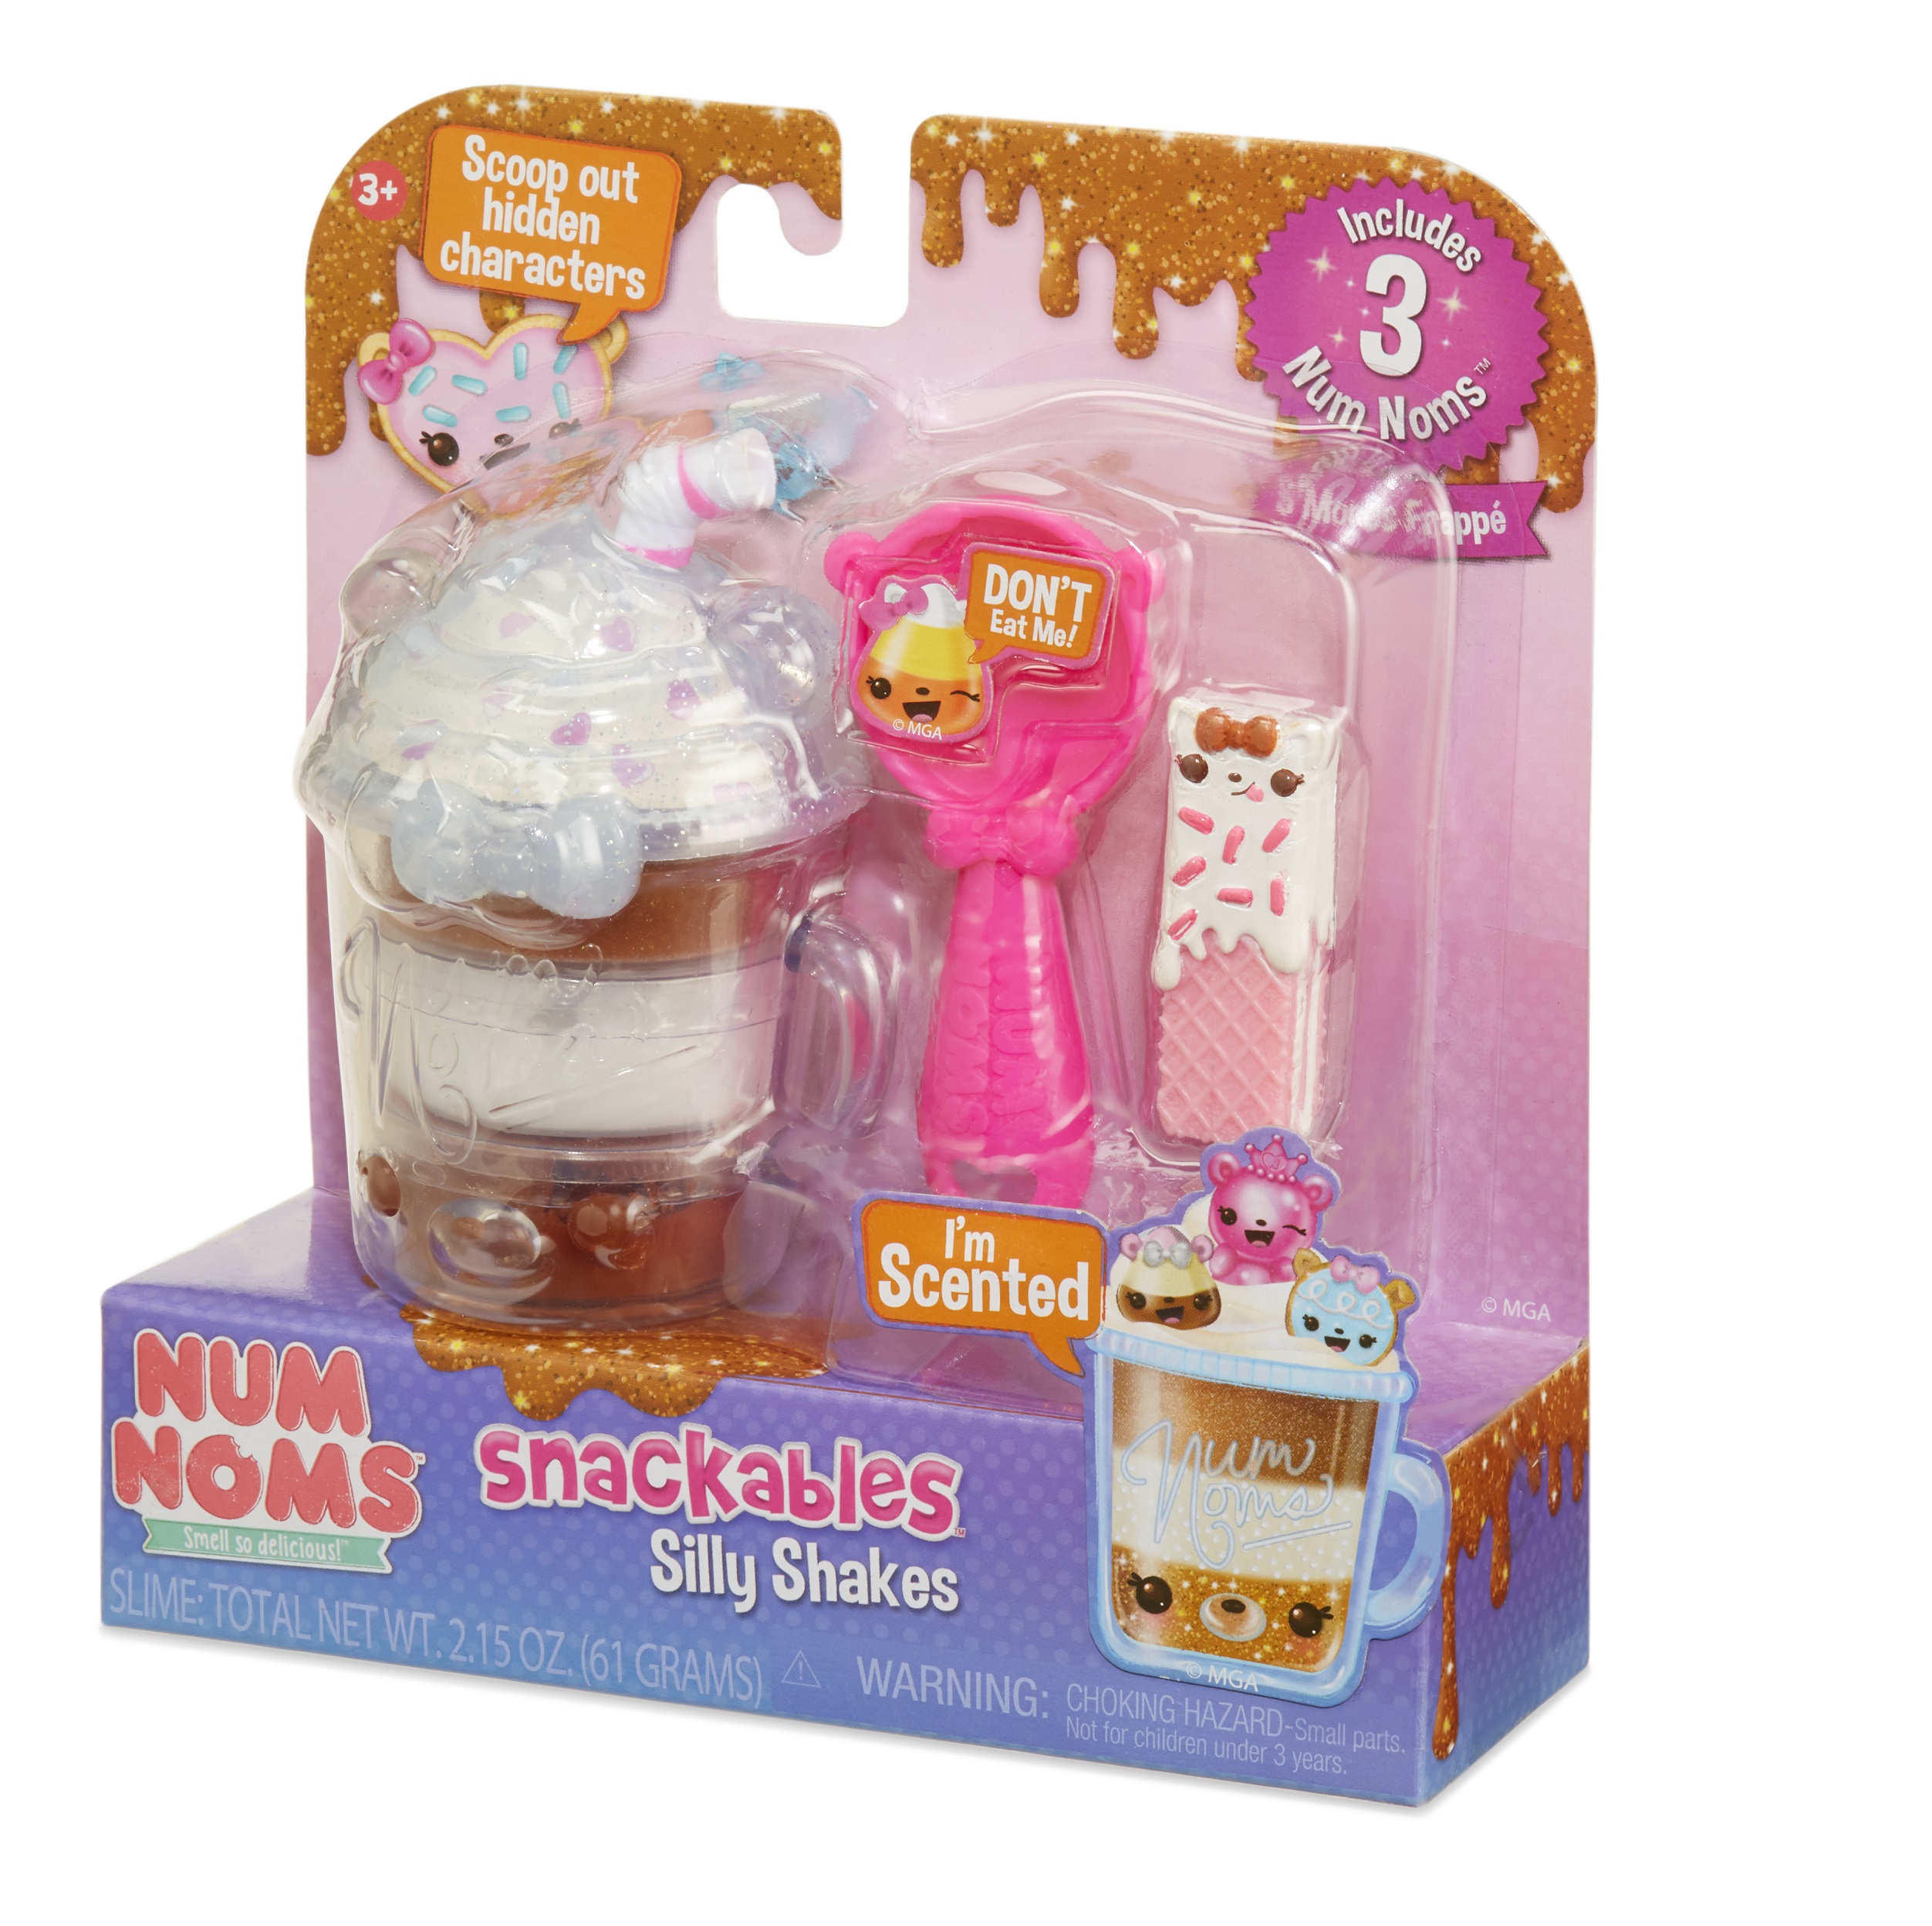 Num Noms Snackables Silly Shakes- S'Mores Frappe - image 4 of 6